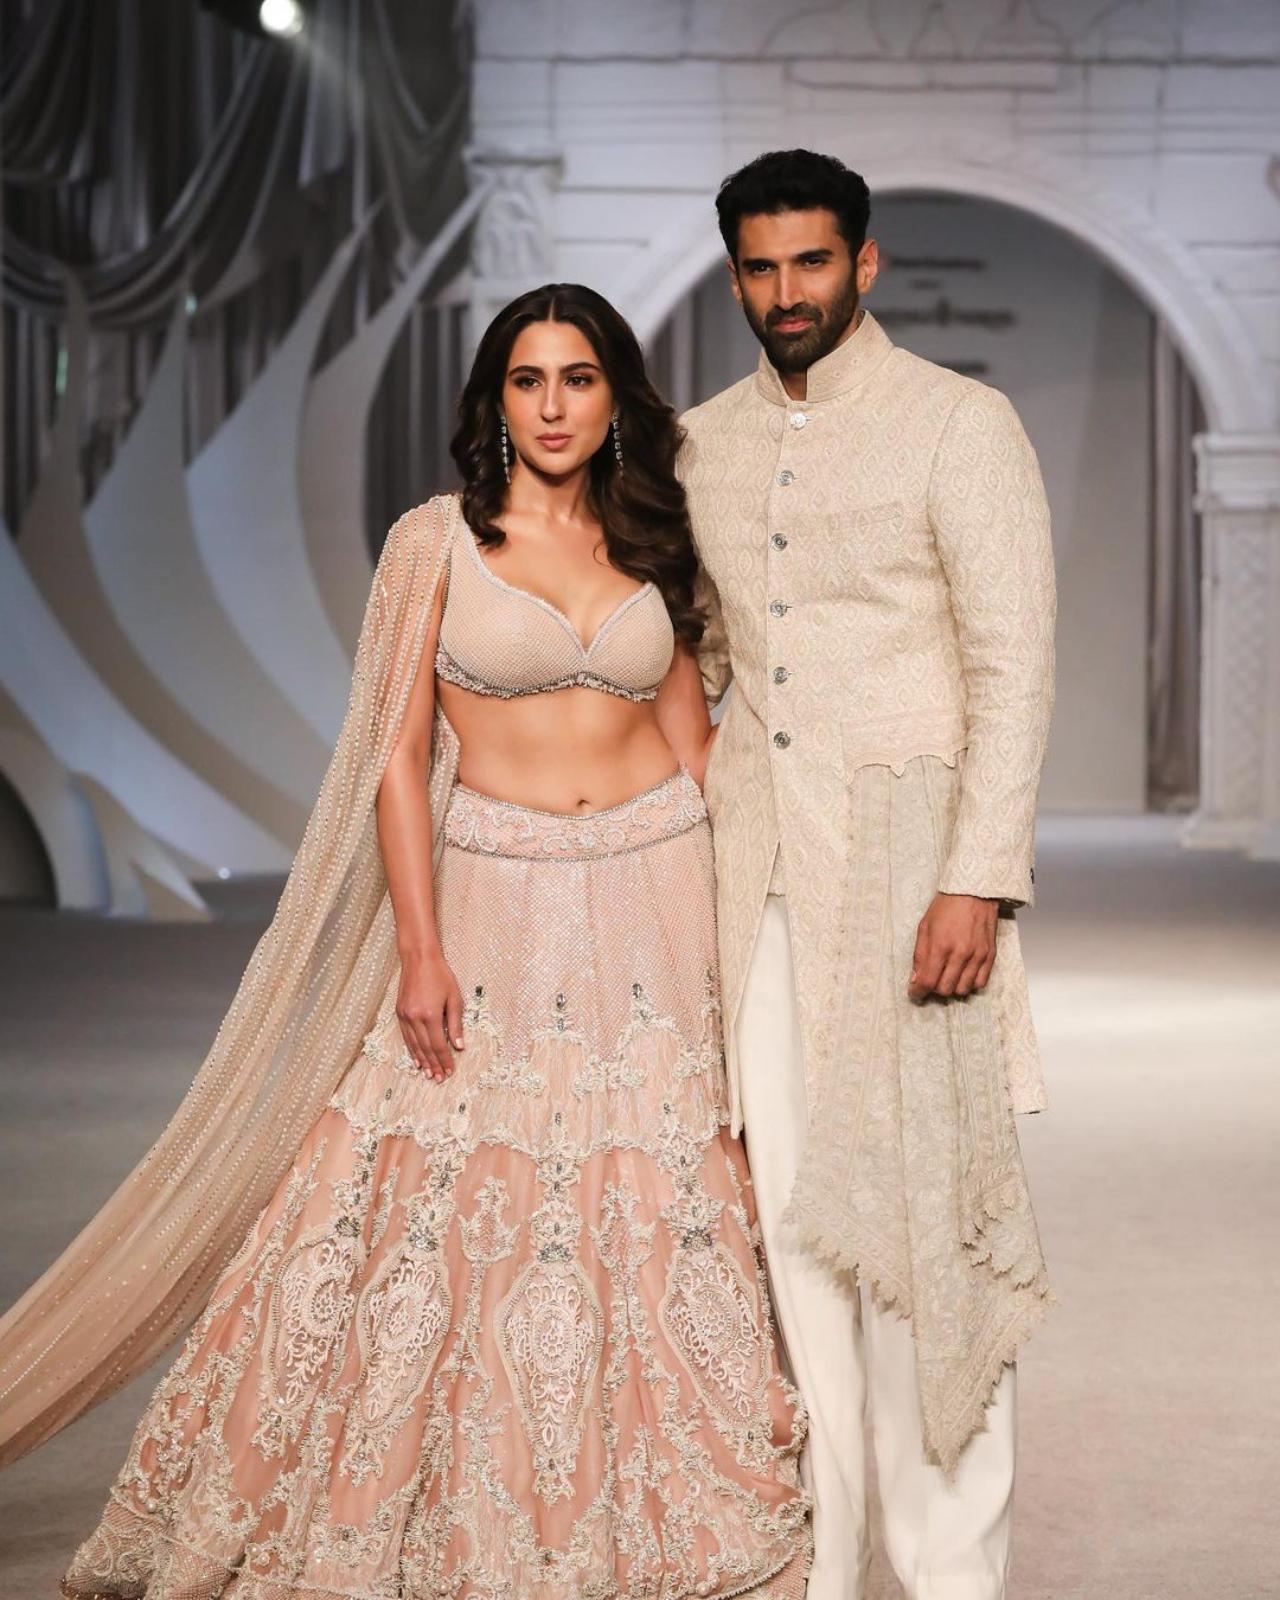 Couturiers Shantnu & Nikhil showcased their collection ‘Etheria’ at India Couture Week 2023. Their collection was inspired by their travels in Italy and fused Indian and Roman aesthetics to create regal outfits